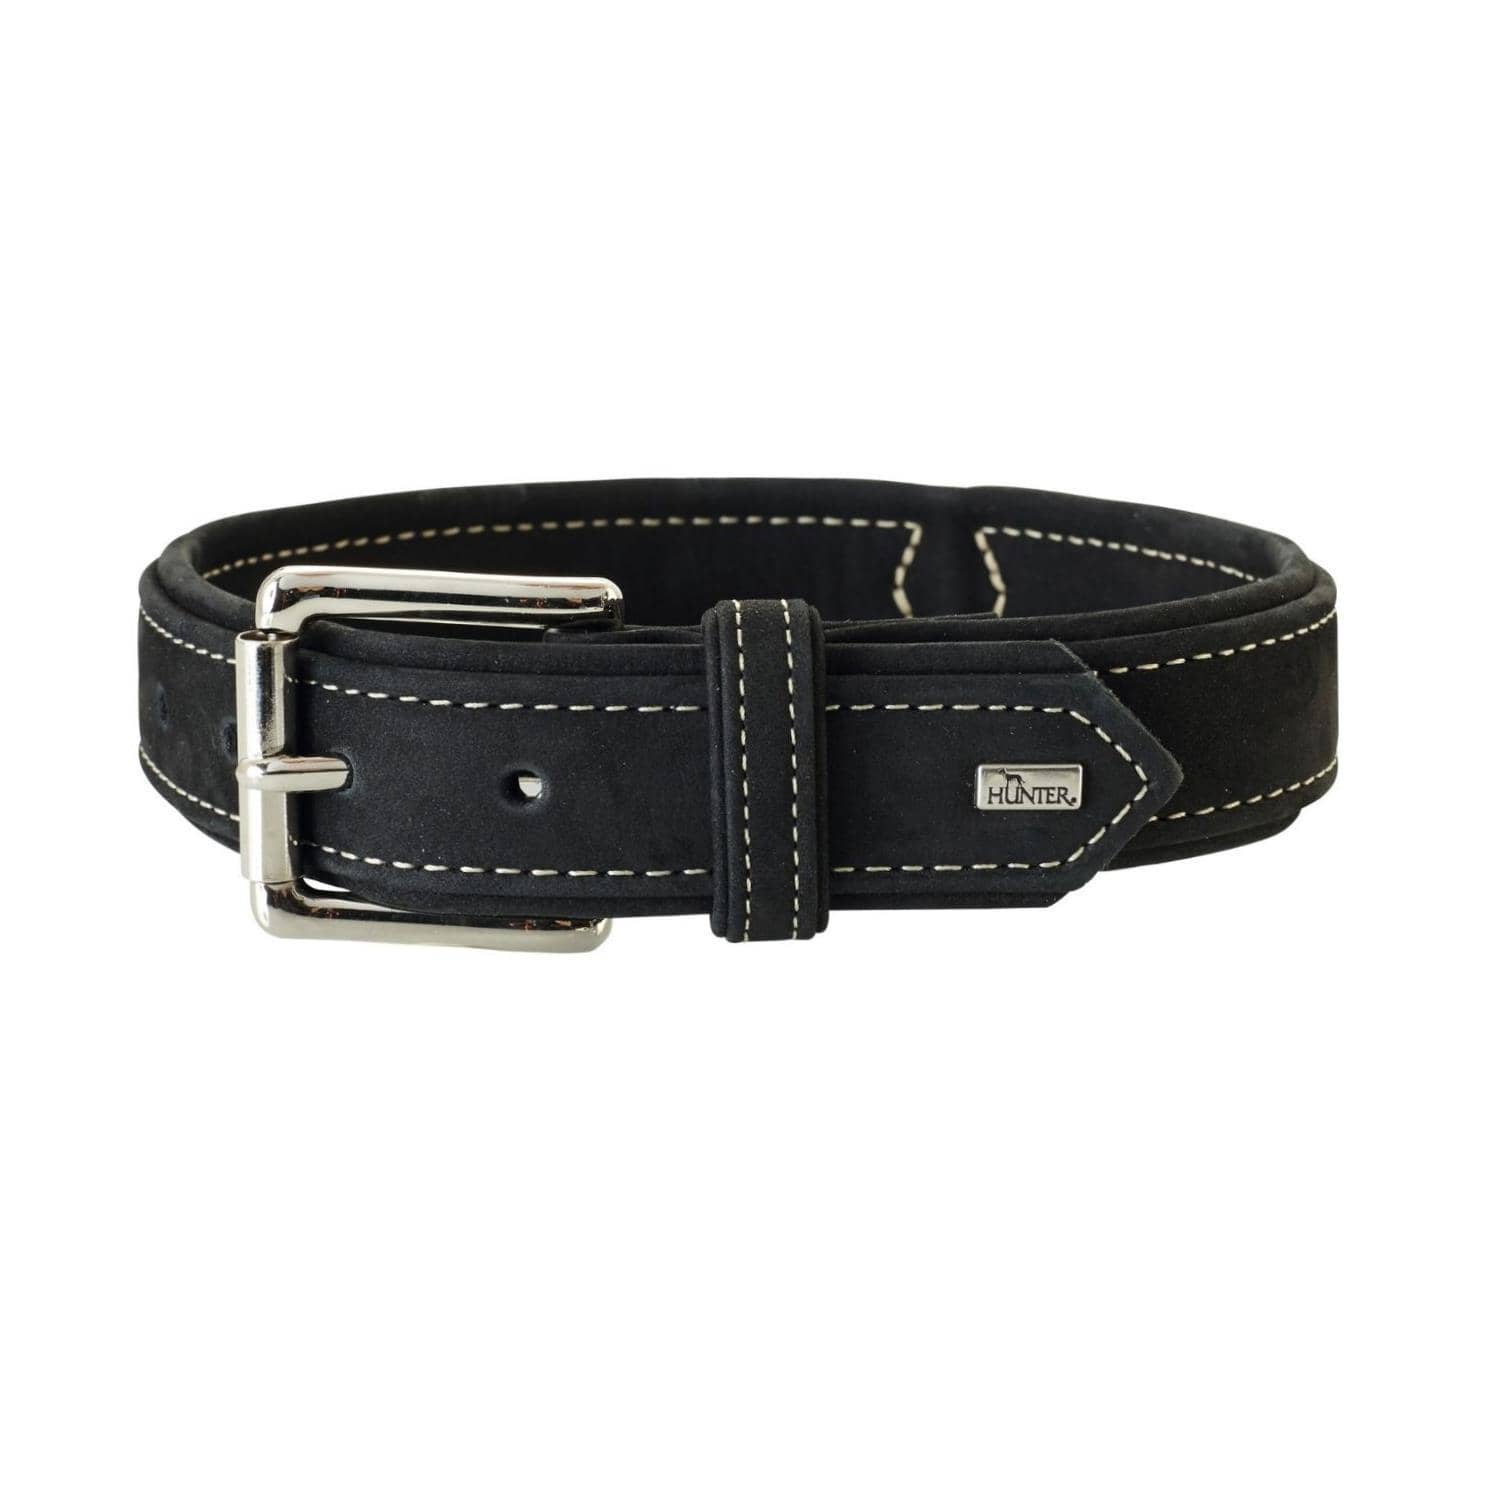 Nubuk Noir Leather Dog Collar - Animal Outfitters Cat & Dog Accessories